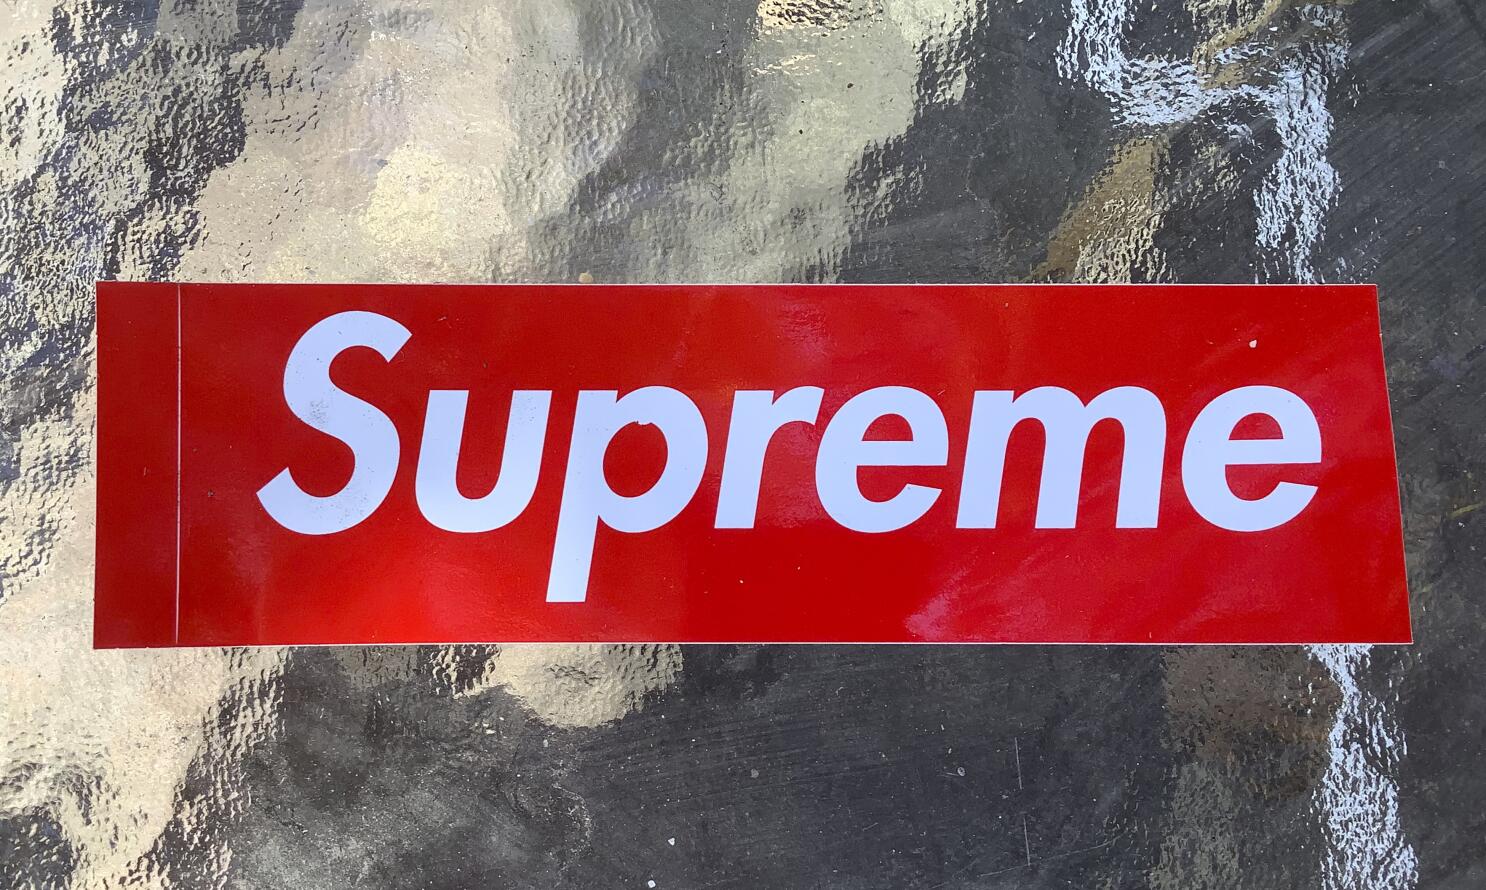 Vans owner VF Corp. is buying streetwear brand Supreme for $2.1 billion